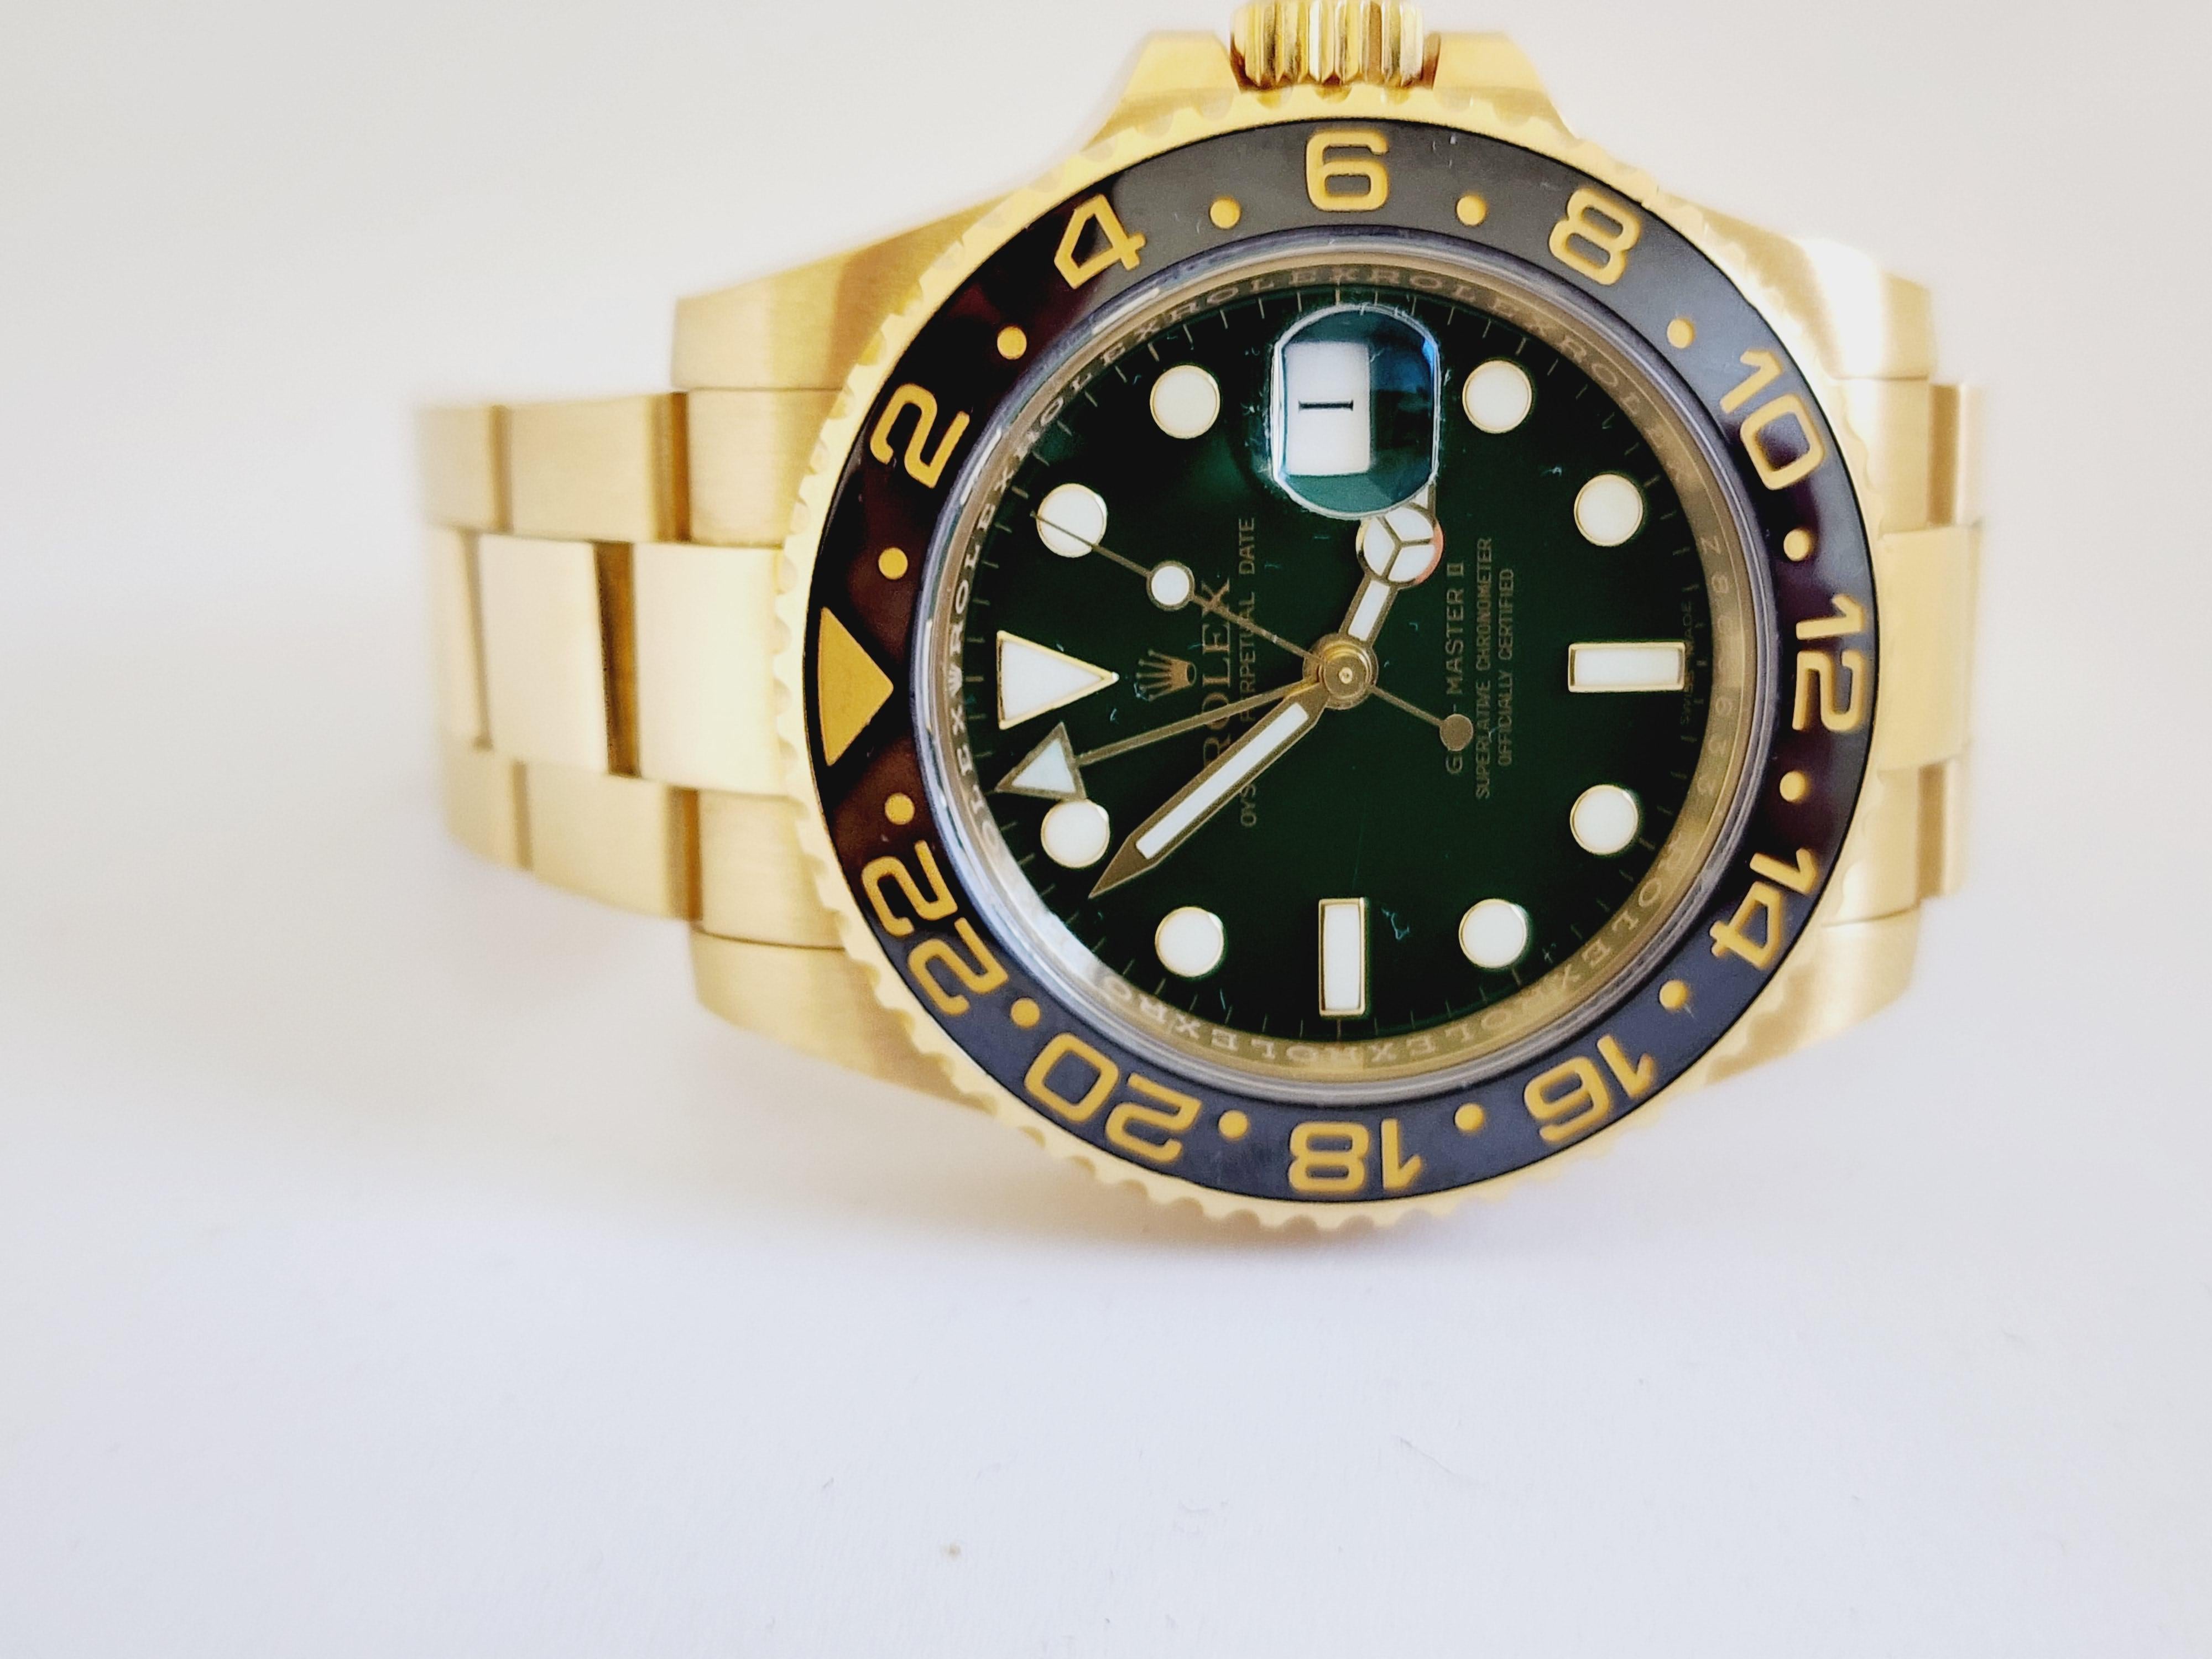 18k yellow gold case with a 18k yellow gold rolex oyster bracelet. Bi-directional rotating, 18k yellow gold bezel. Green dial with yellow gold tone hands and luminous dots hour markers. Dial Tyle Analog. Luminescent hand and dial markers. Date